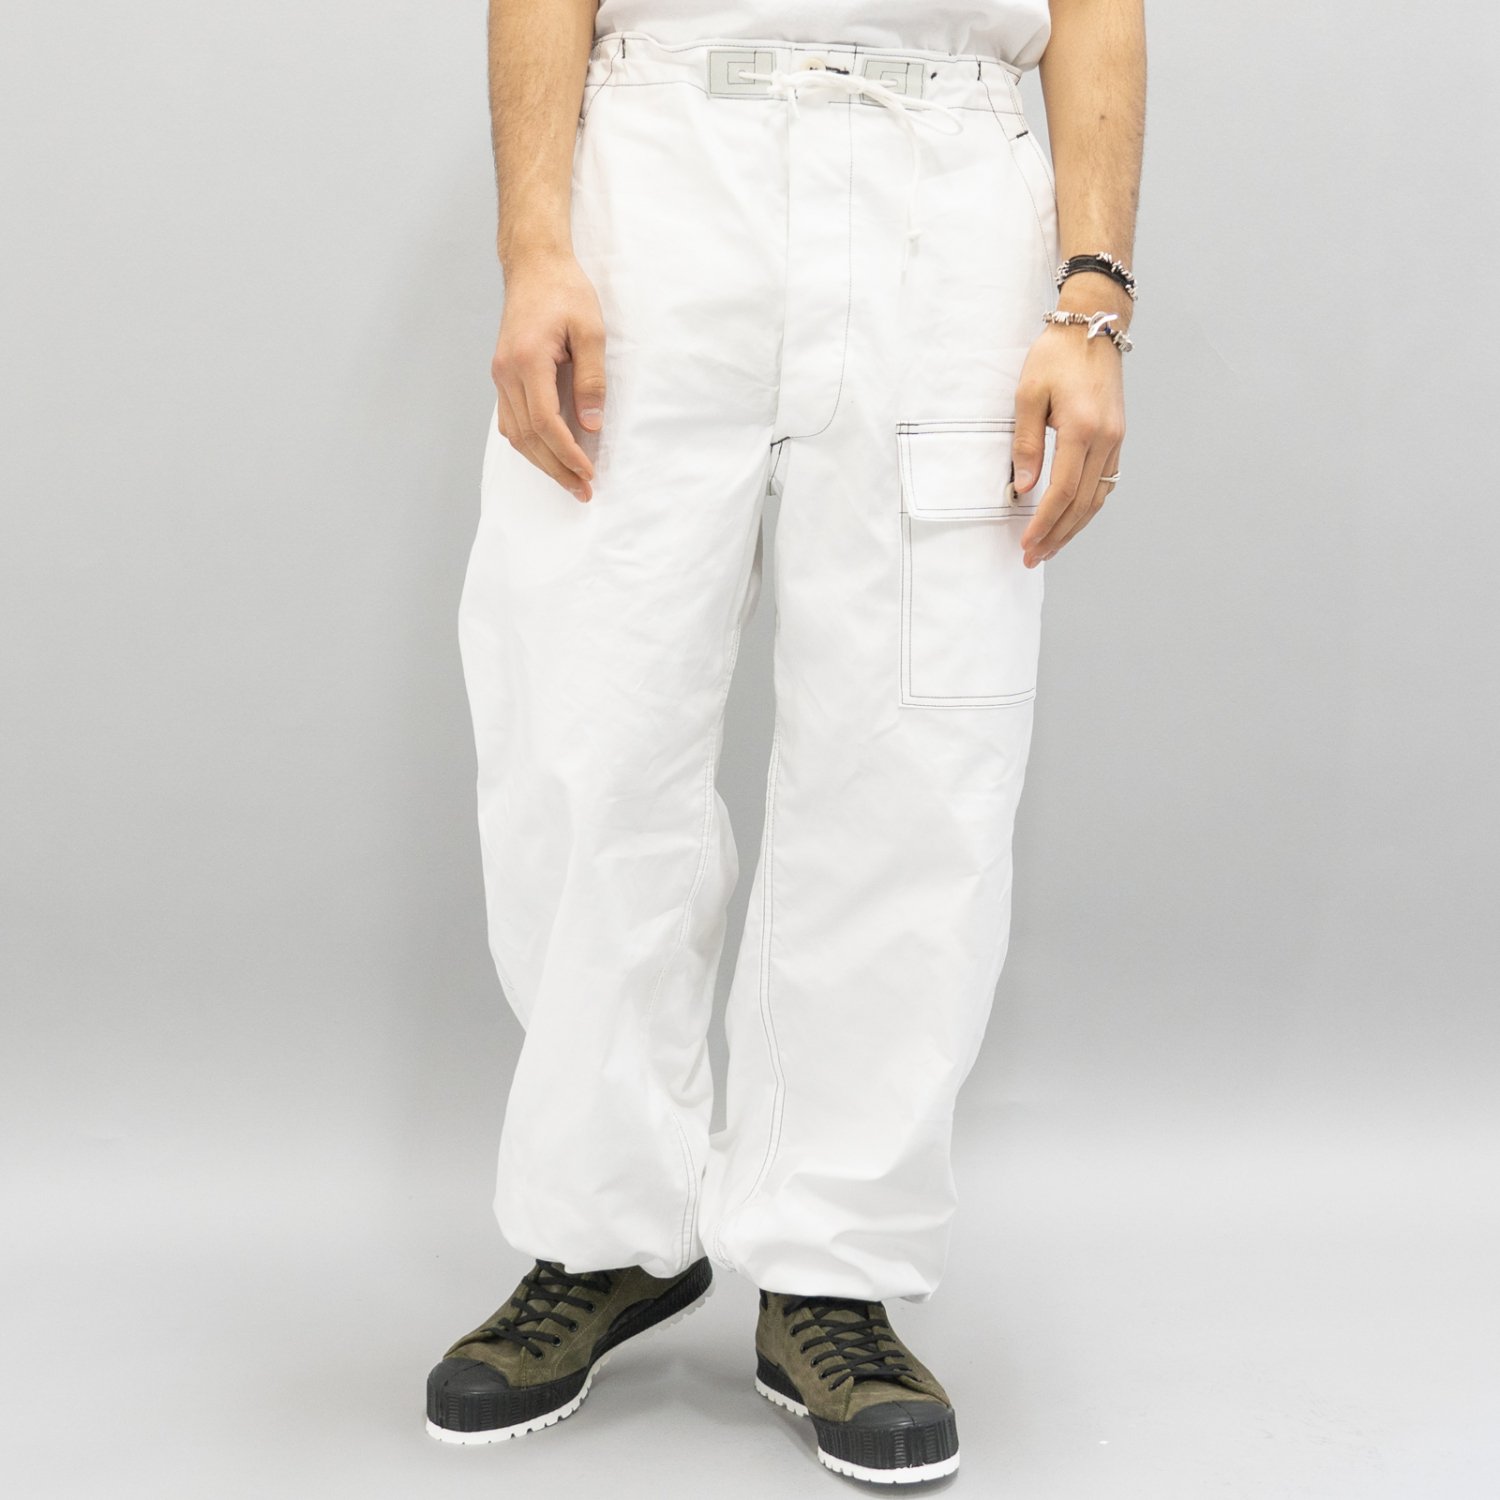 TUKISOLD OUT * 0131 Over Pants * White